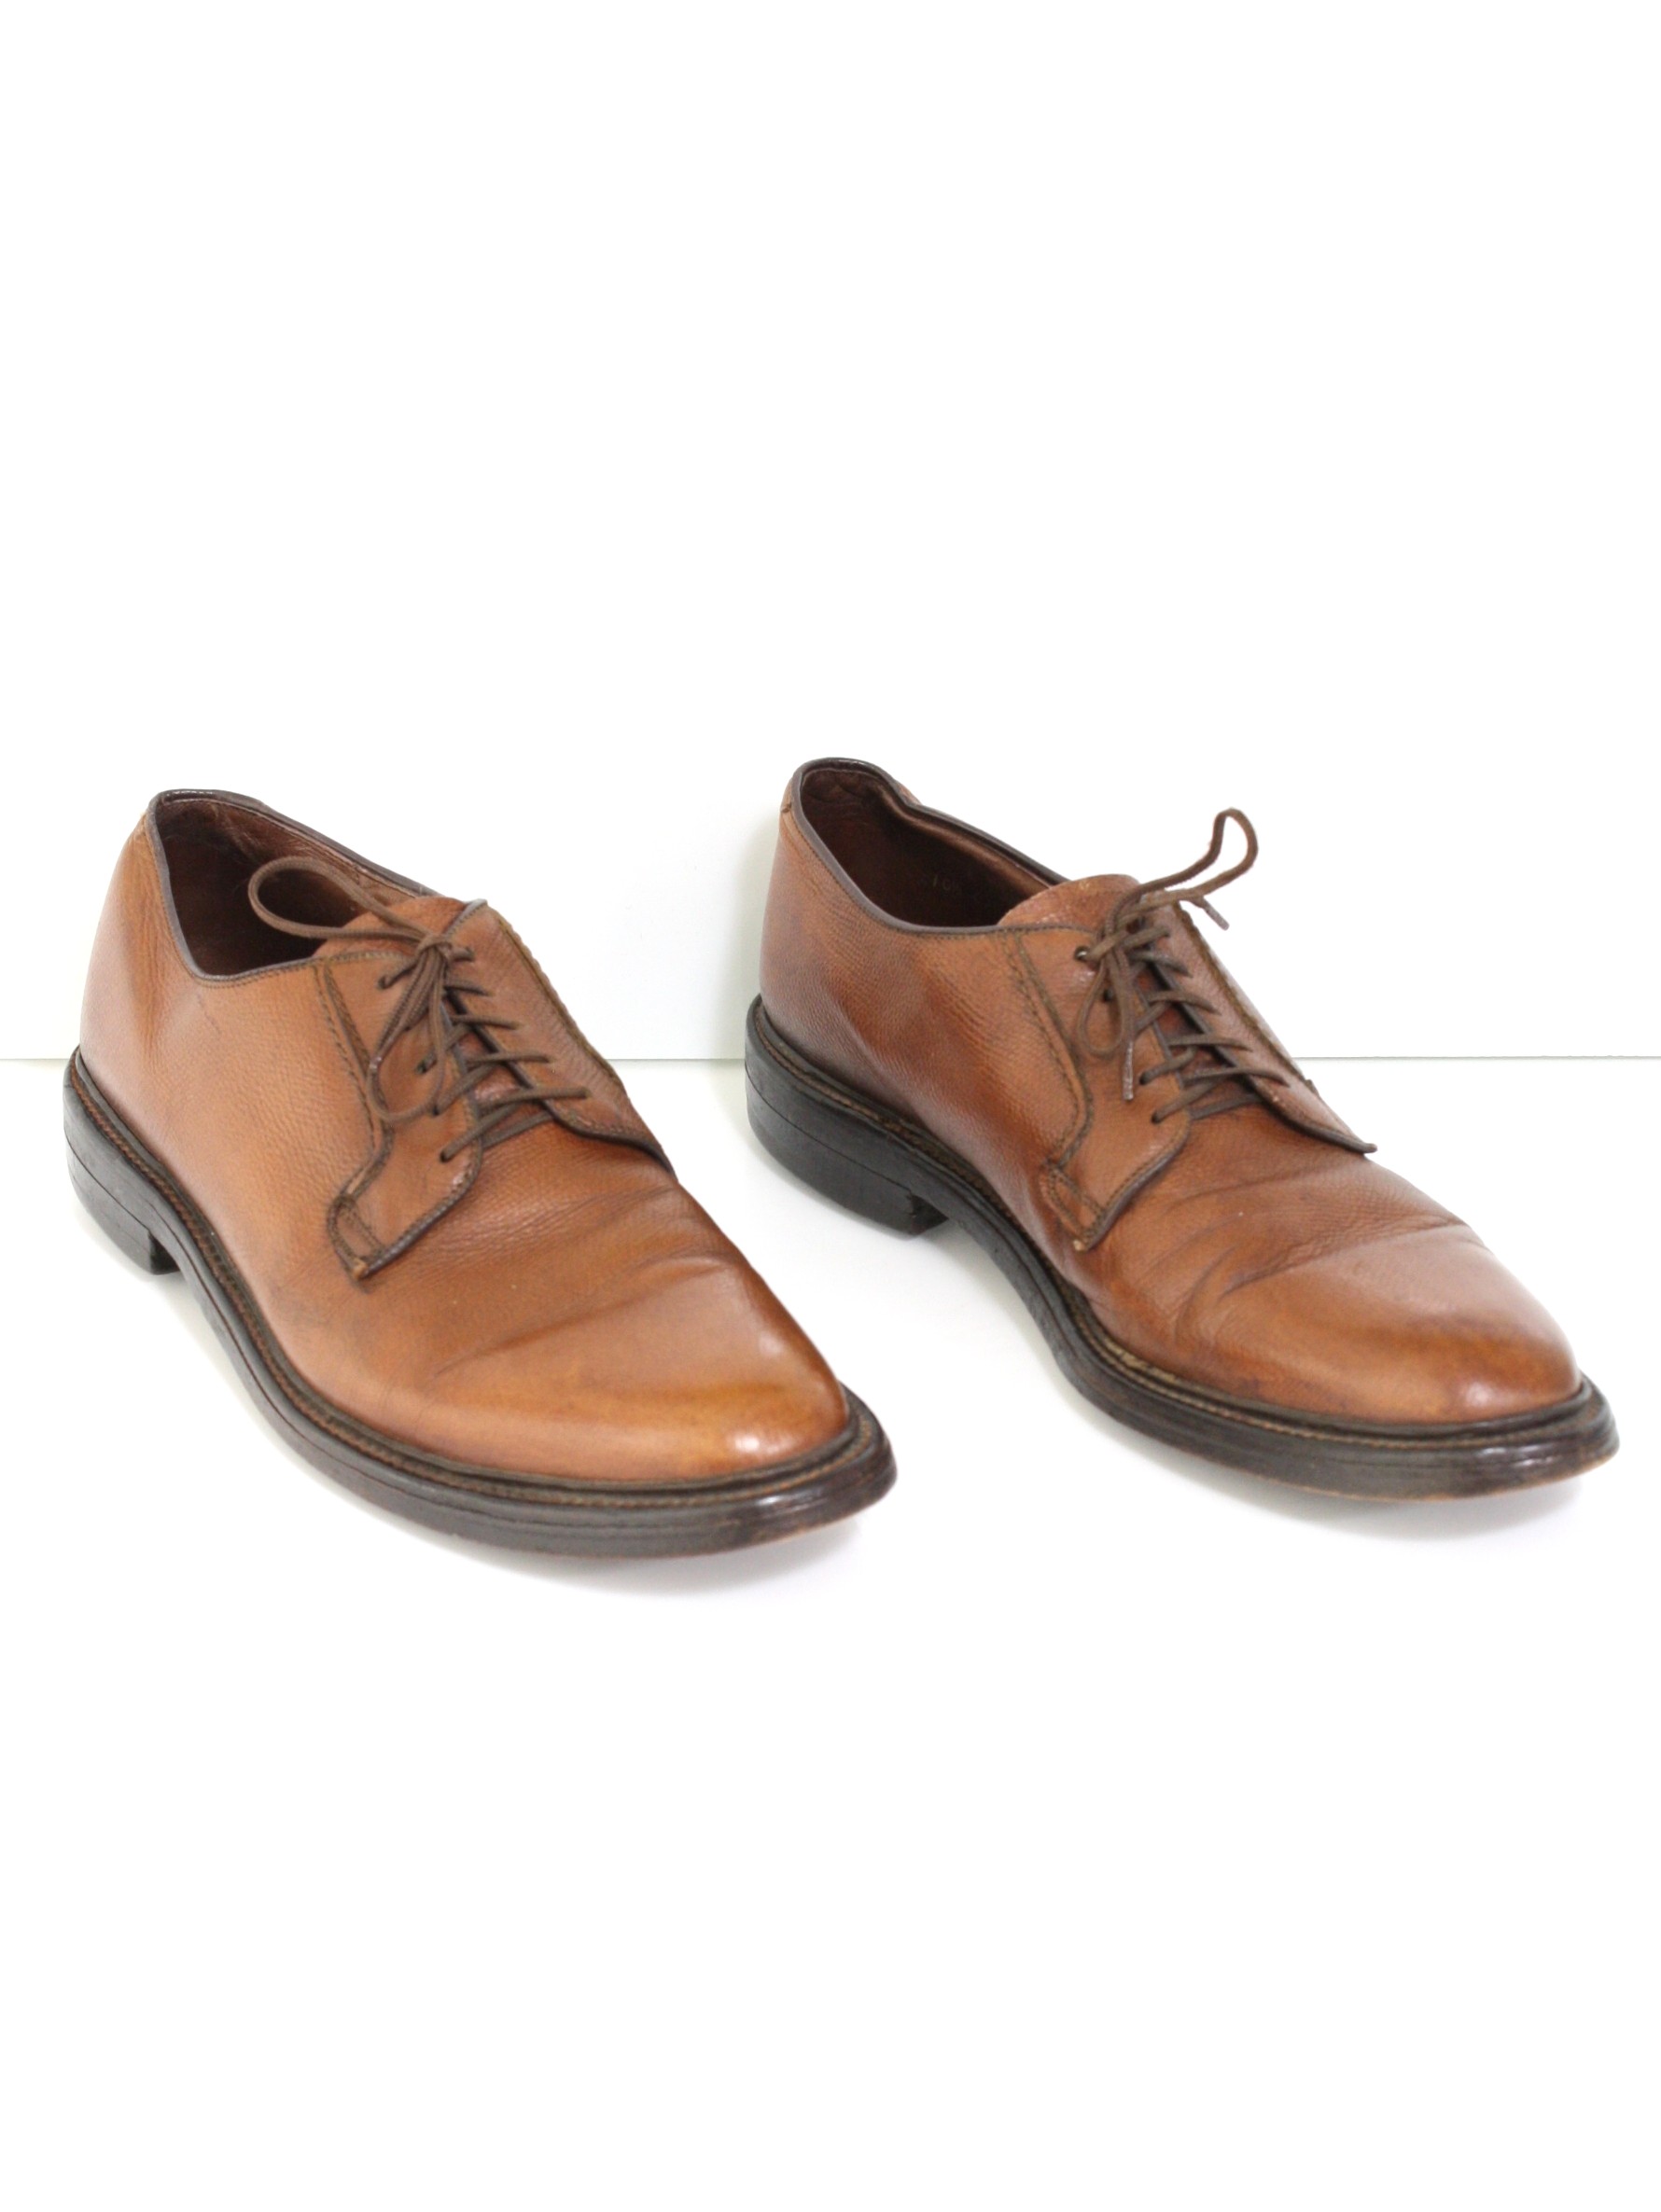 Vintage 1950's Shoes: Late 50s -The Hanover Shoe- Mens brown pebble ...